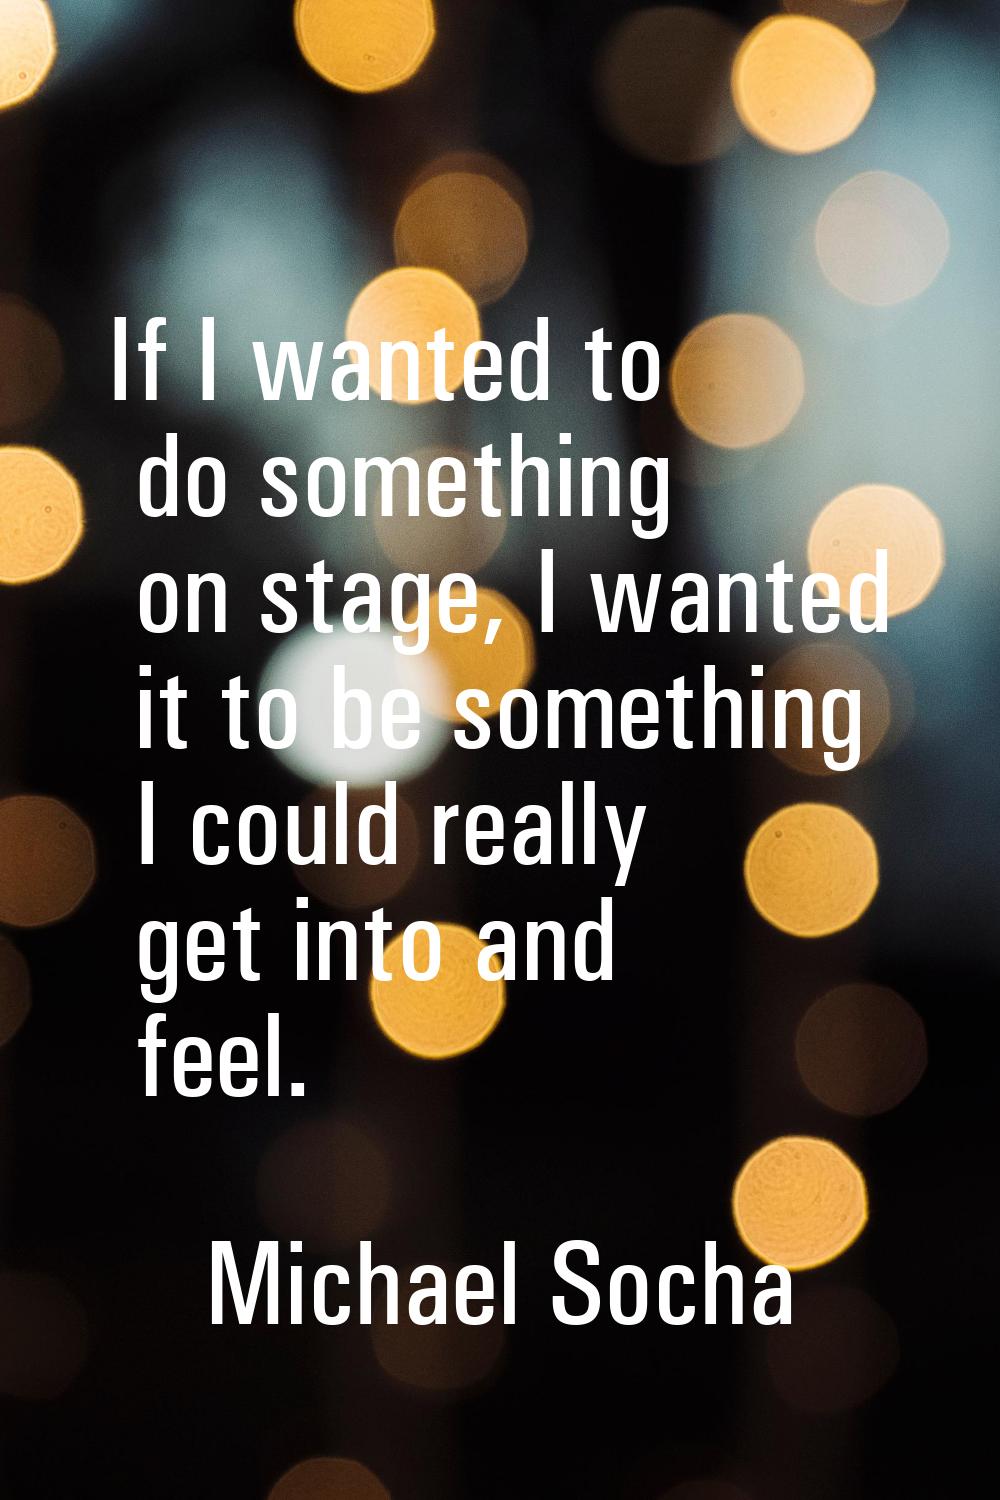 If I wanted to do something on stage, I wanted it to be something I could really get into and feel.